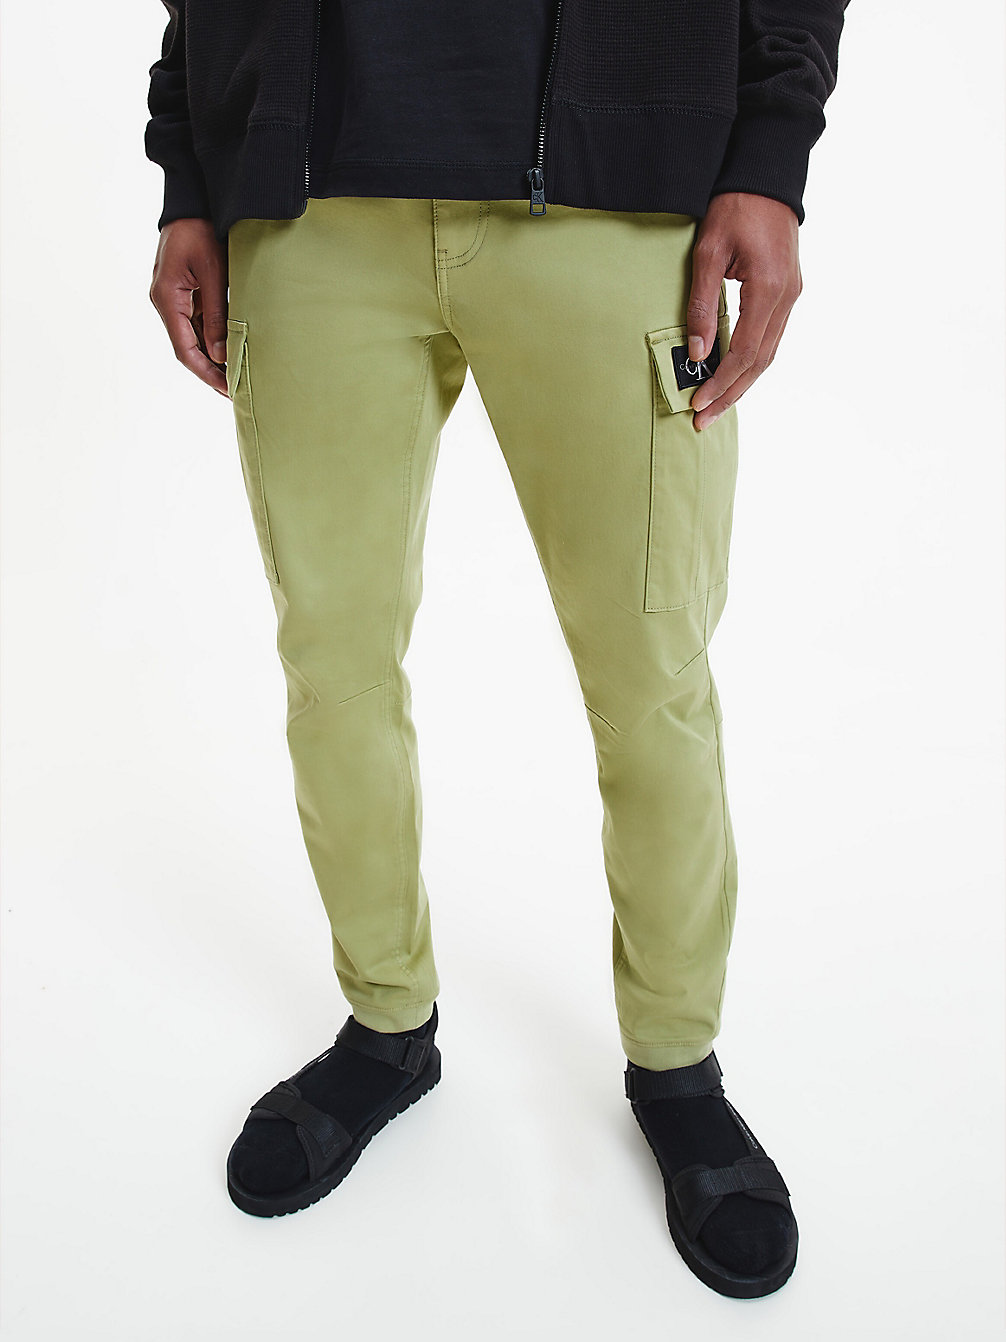 Pantalones Cargo Skinny > FADED OLIVE > undefined mujer > Calvin Klein